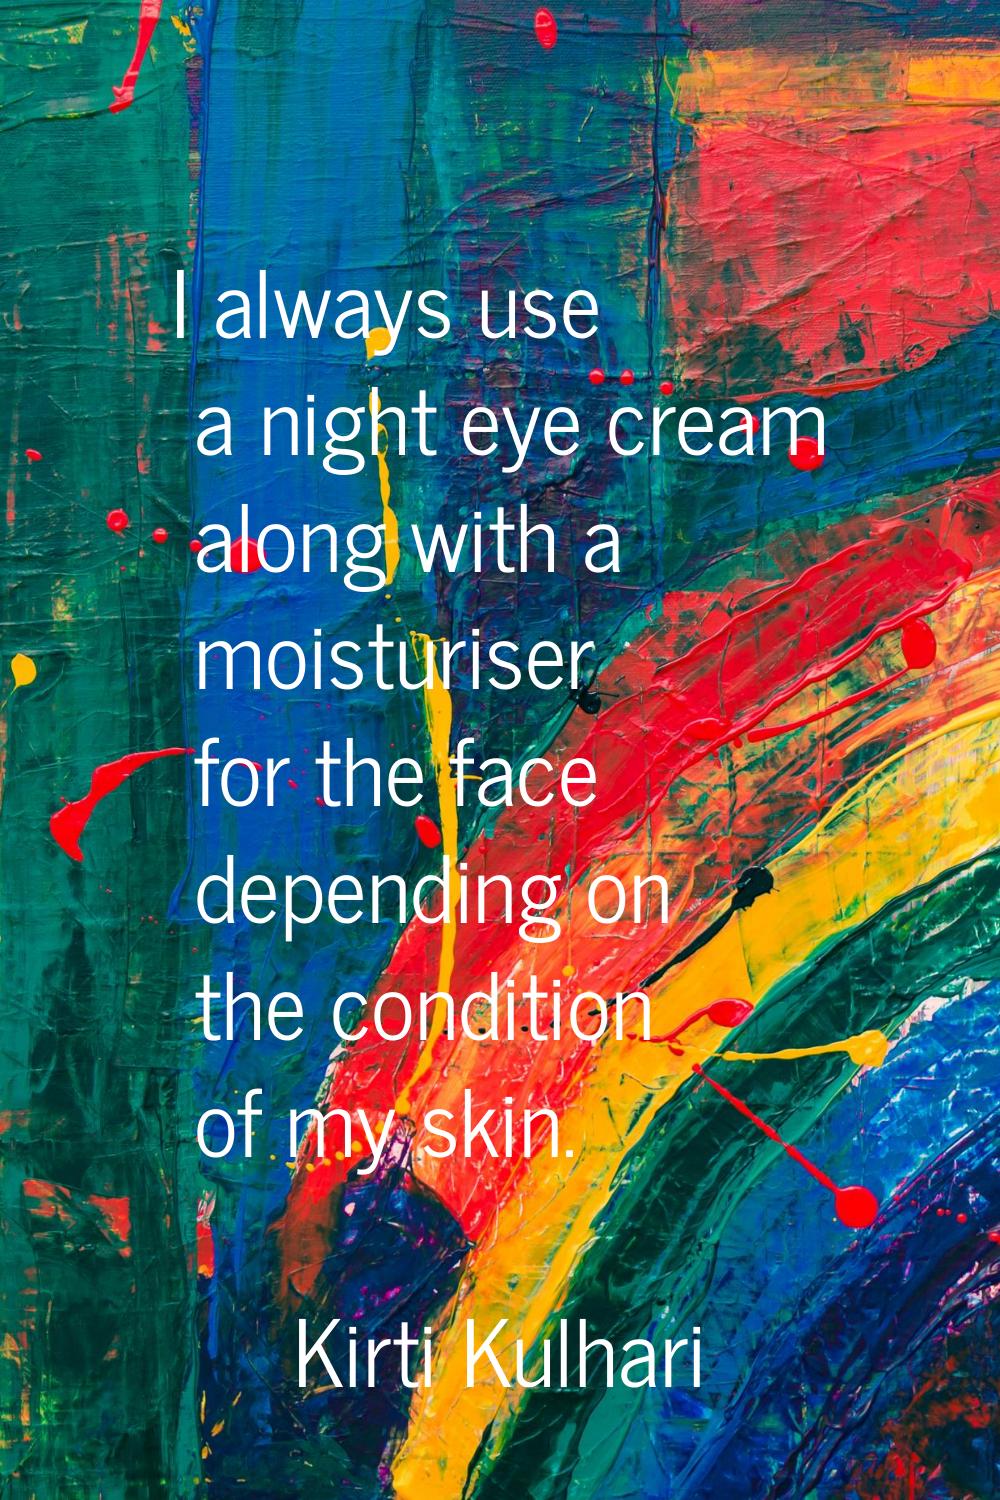 I always use a night eye cream along with a moisturiser for the face depending on the condition of 